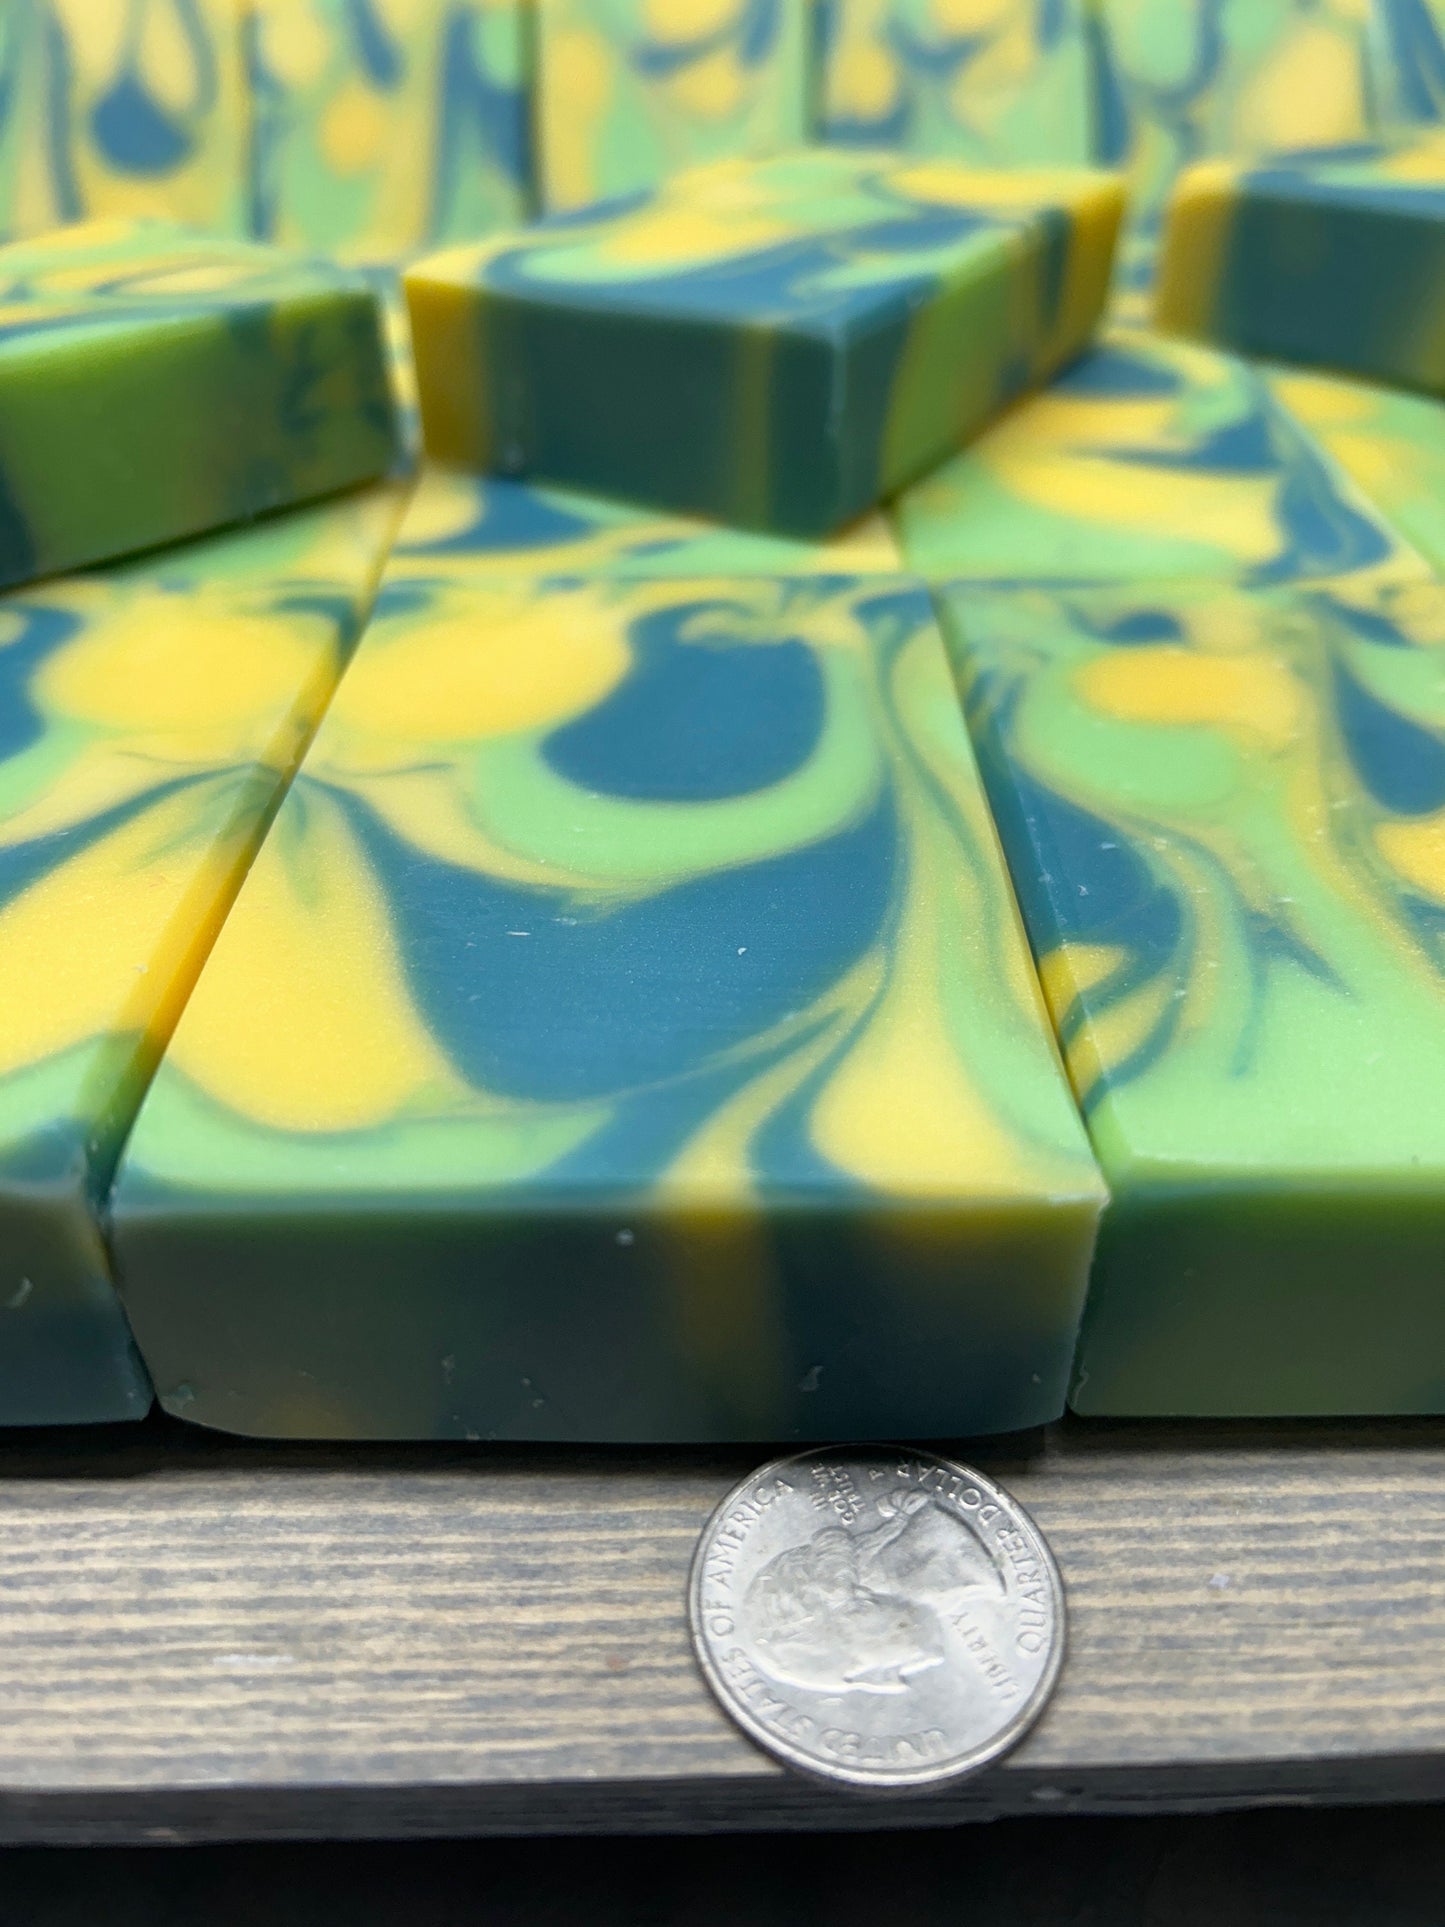 Lemongrass Bar Soap 5.0 oz. Smooth and Creamy with that Lemon scent! Ahhh